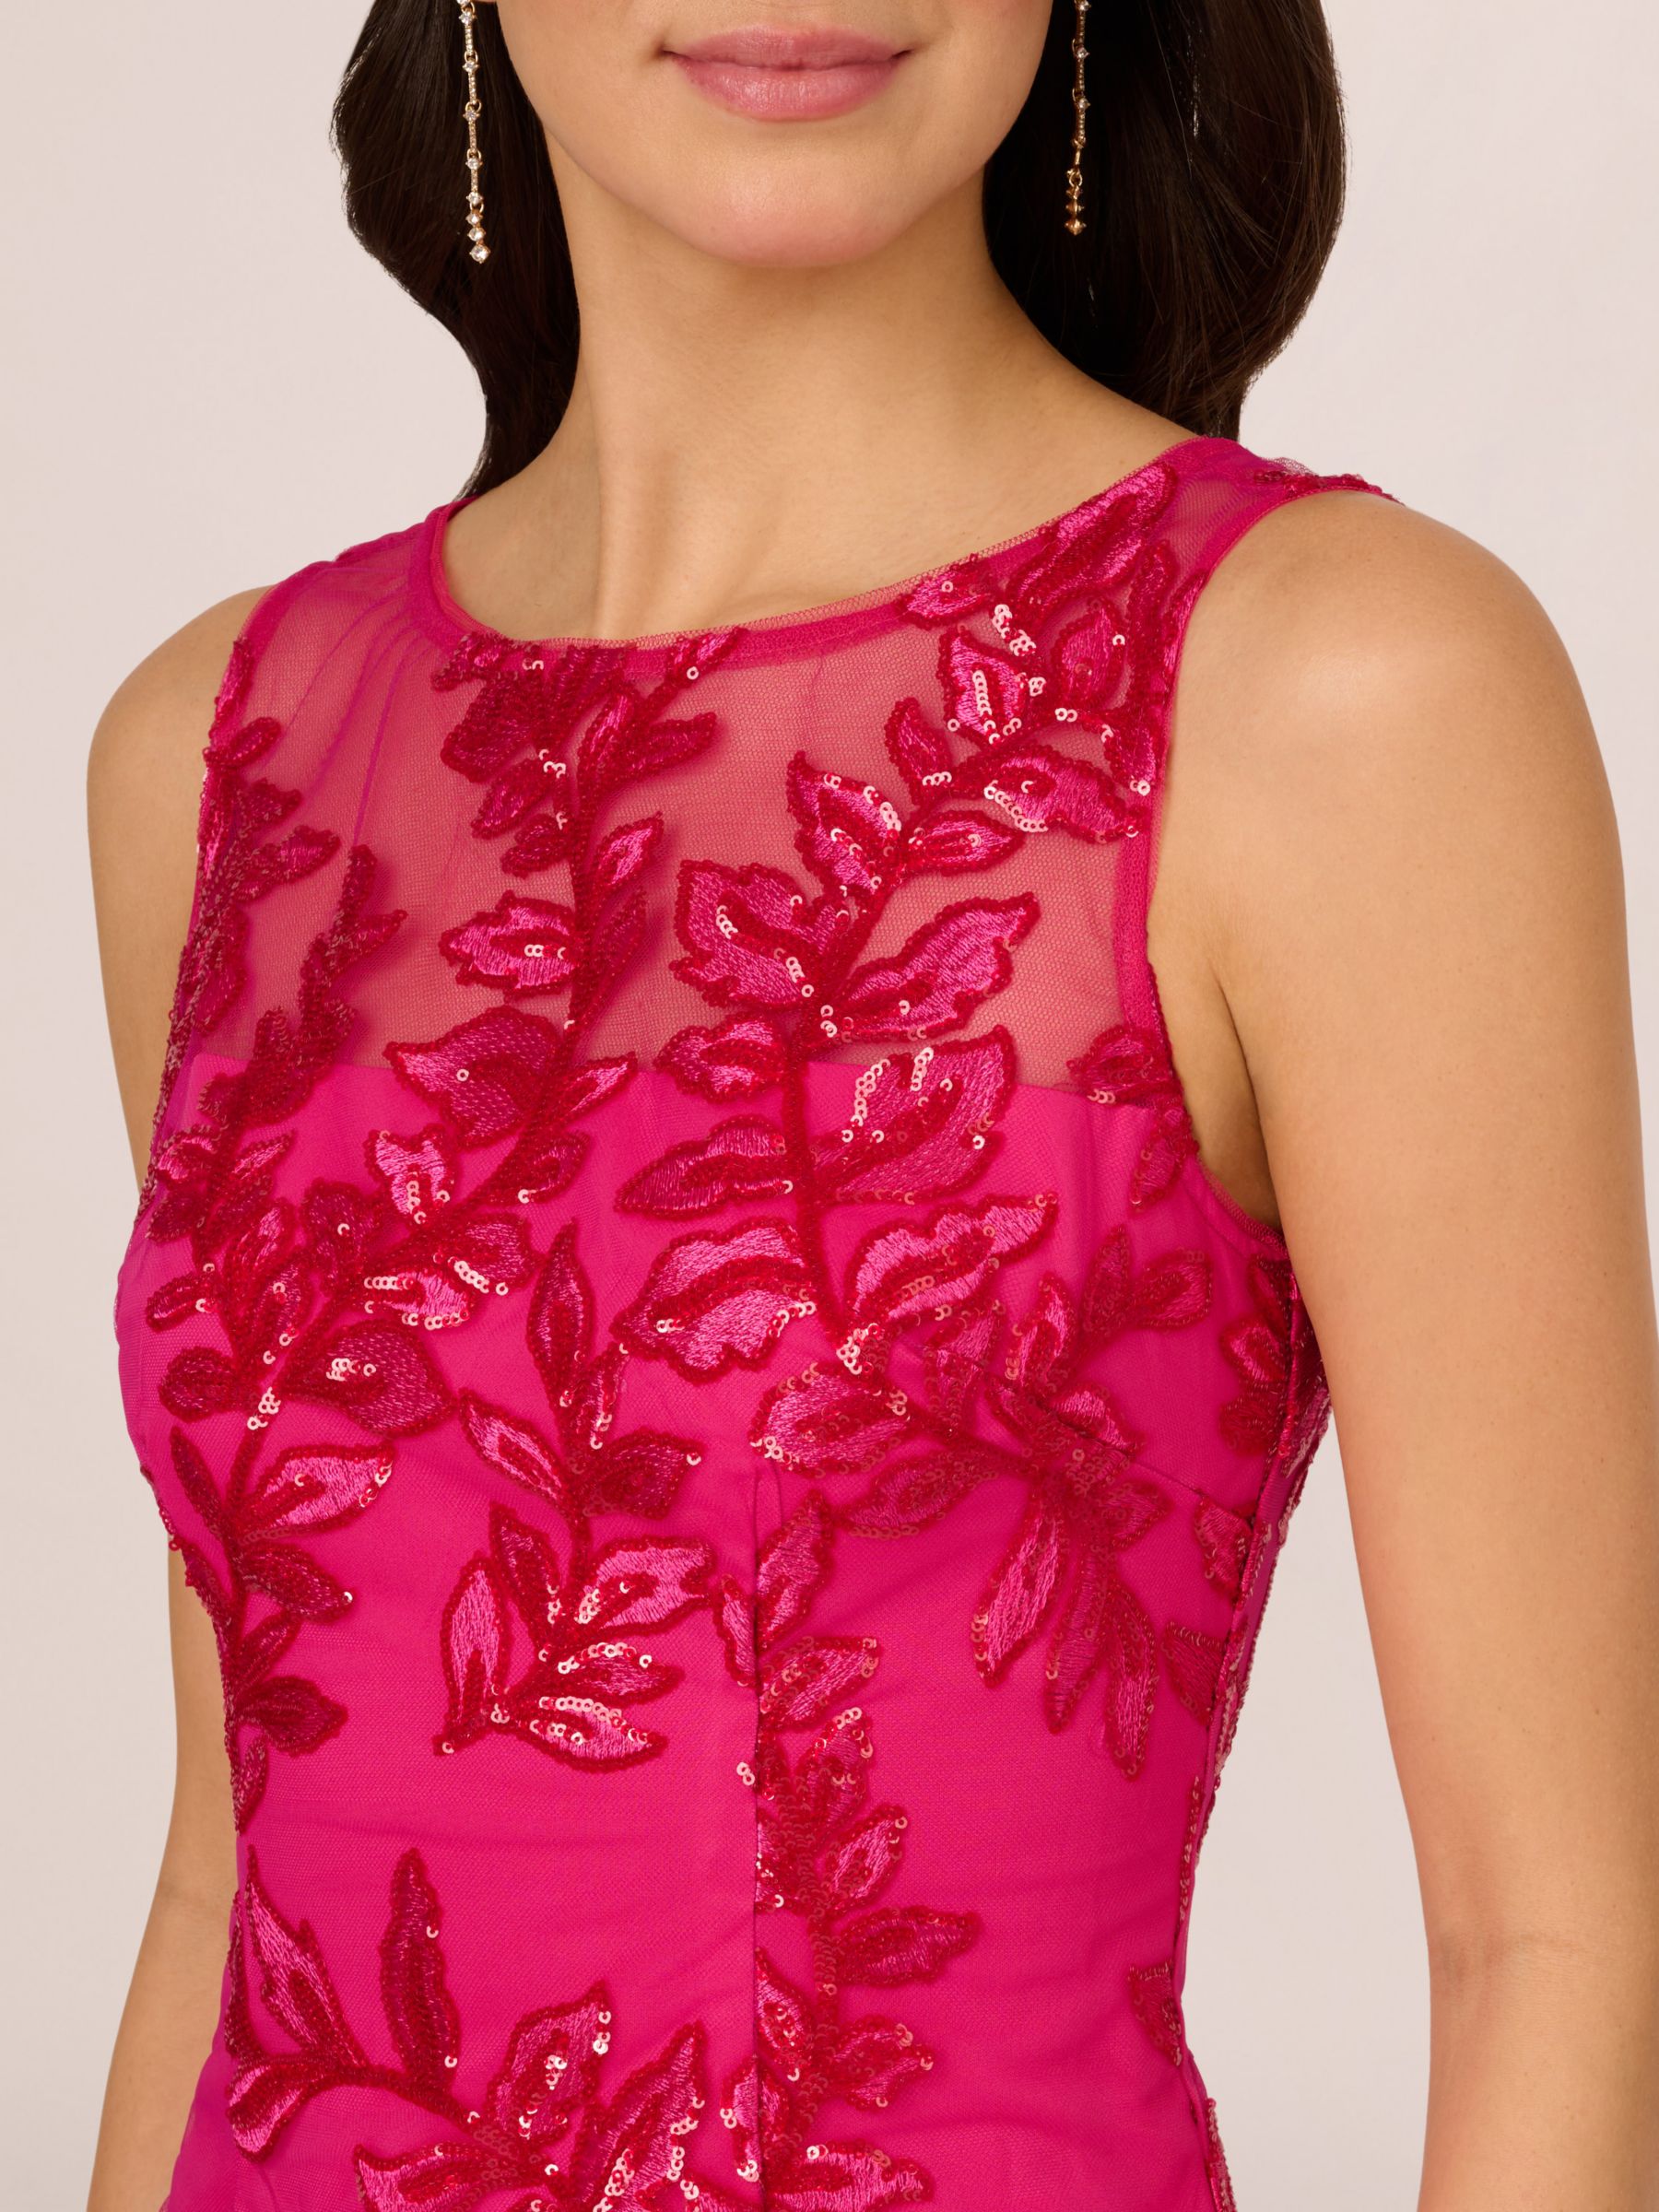 Buy Adrianna Papell Sequin Leaf Sheath Dress, Hot Pink Online at johnlewis.com